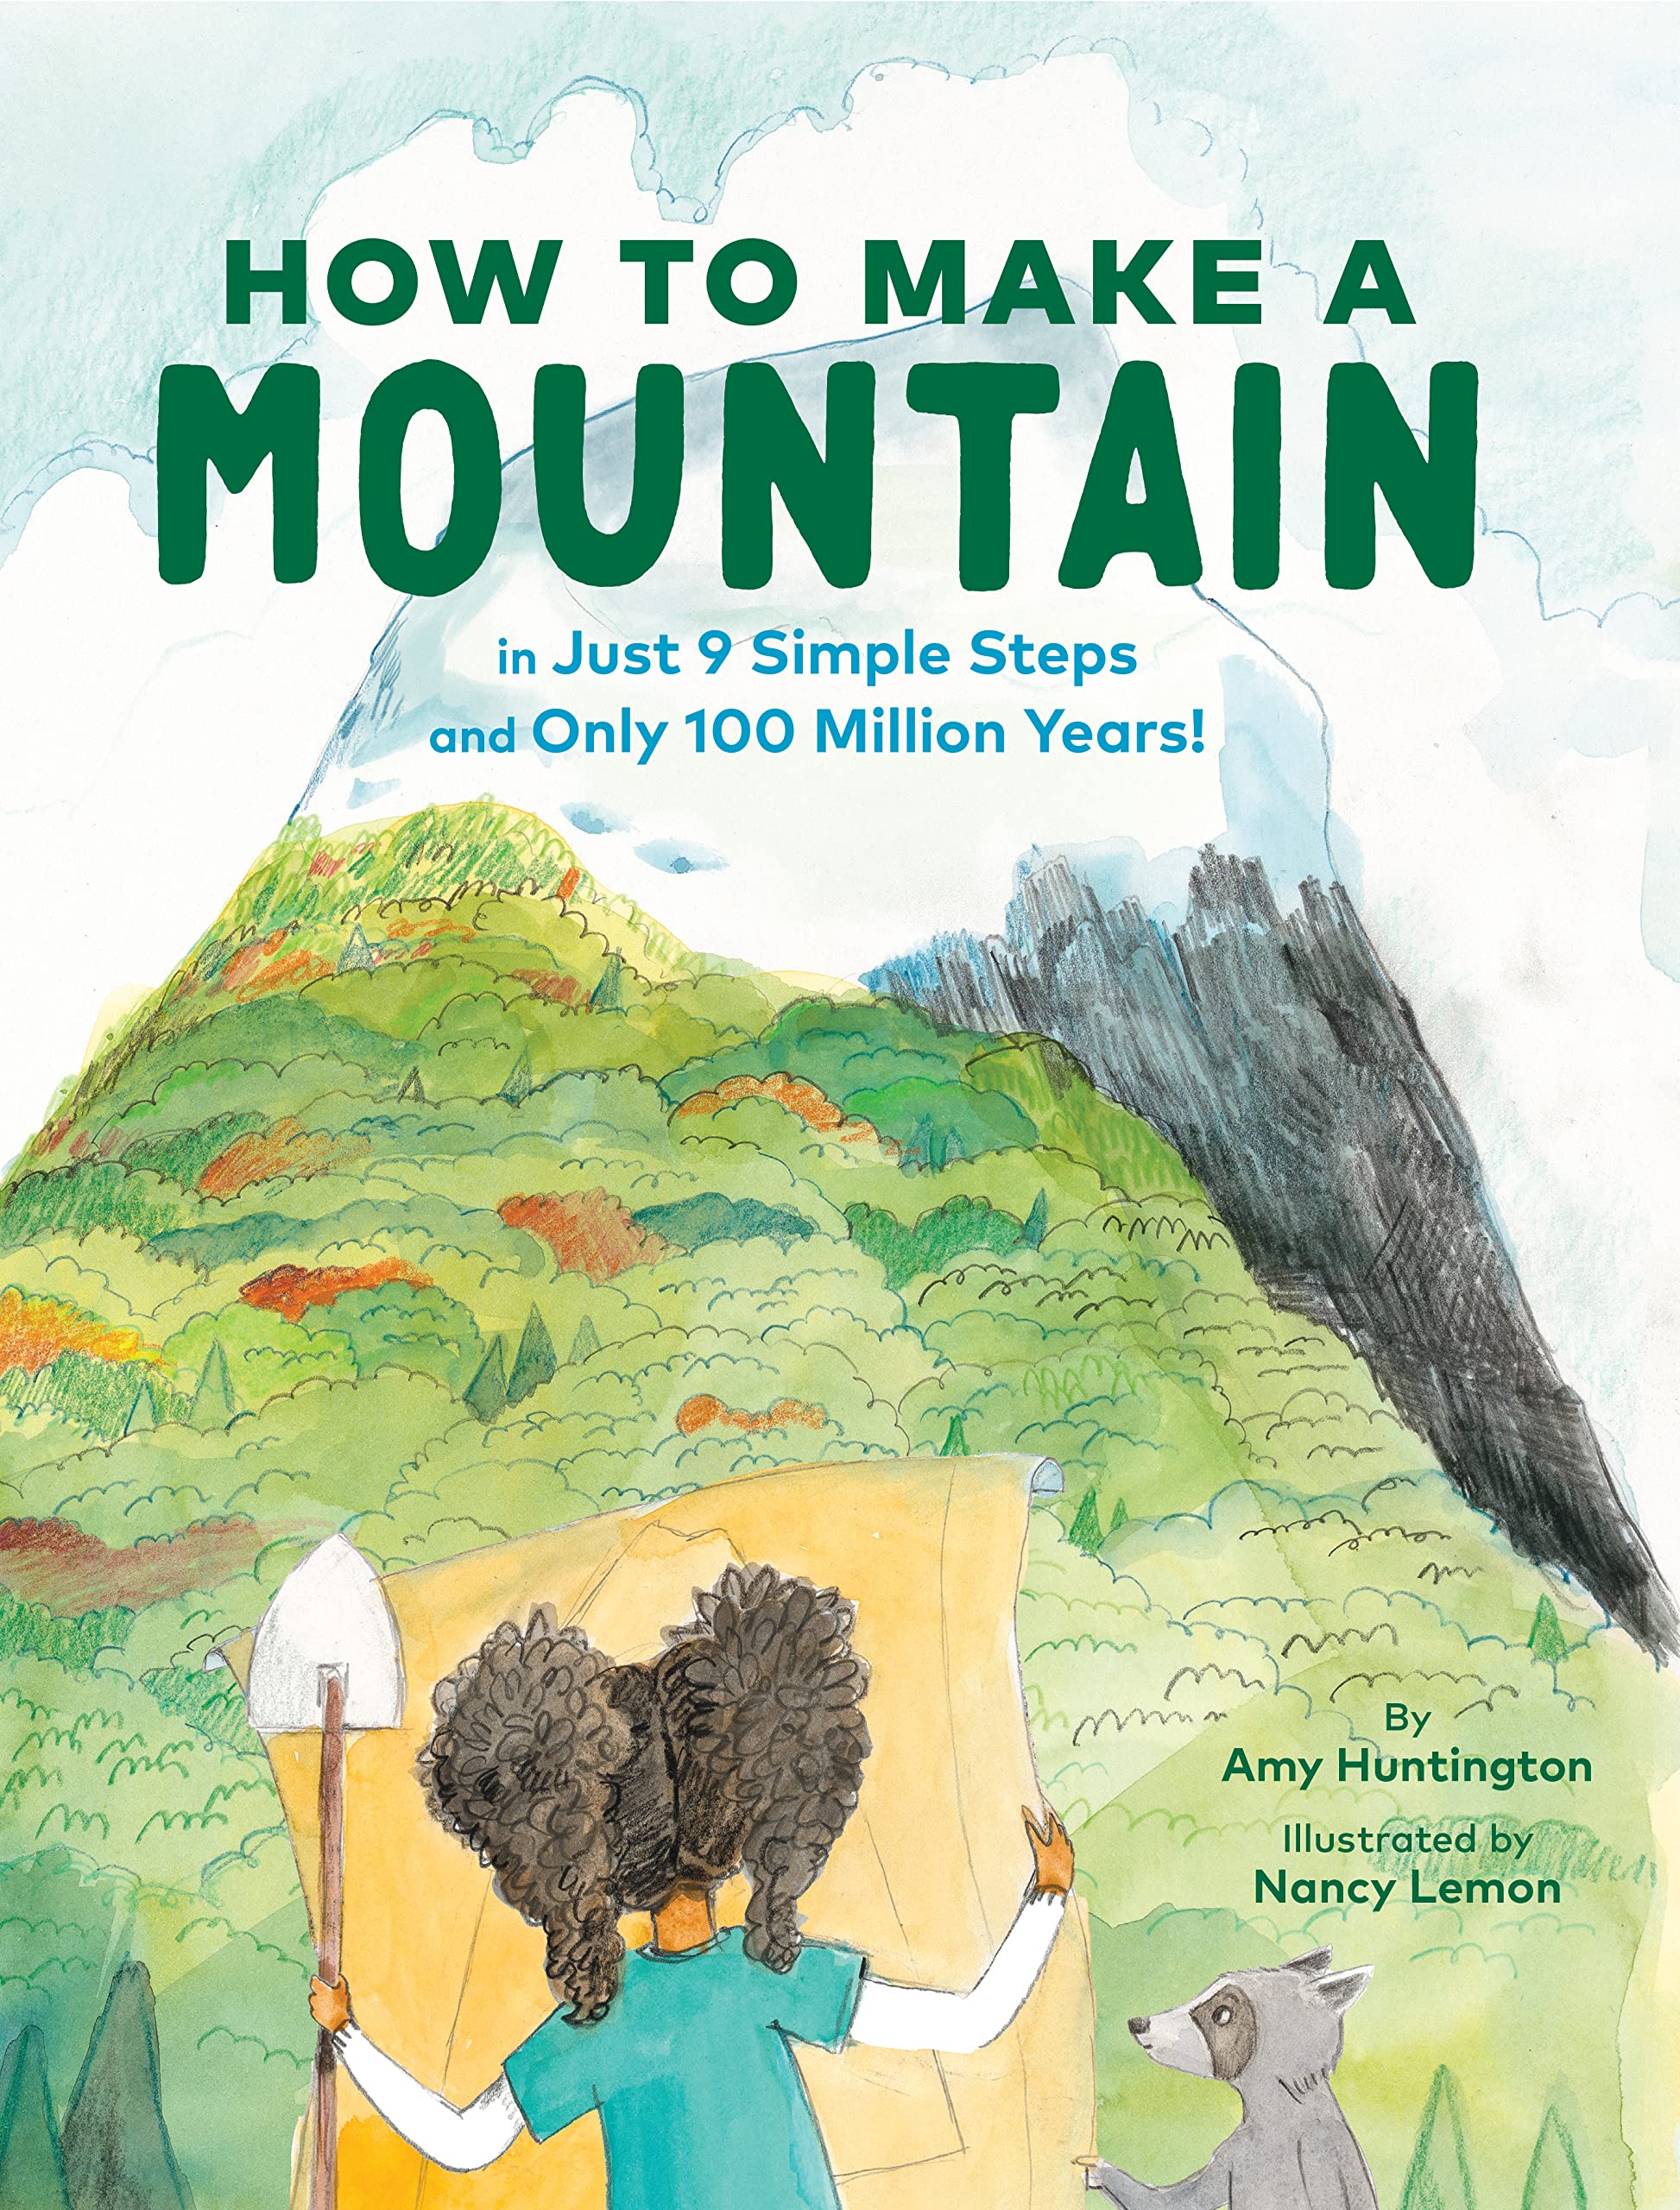 How to Make a Mountain: in Just 9 Simple Steps and Only 100 Million Years!